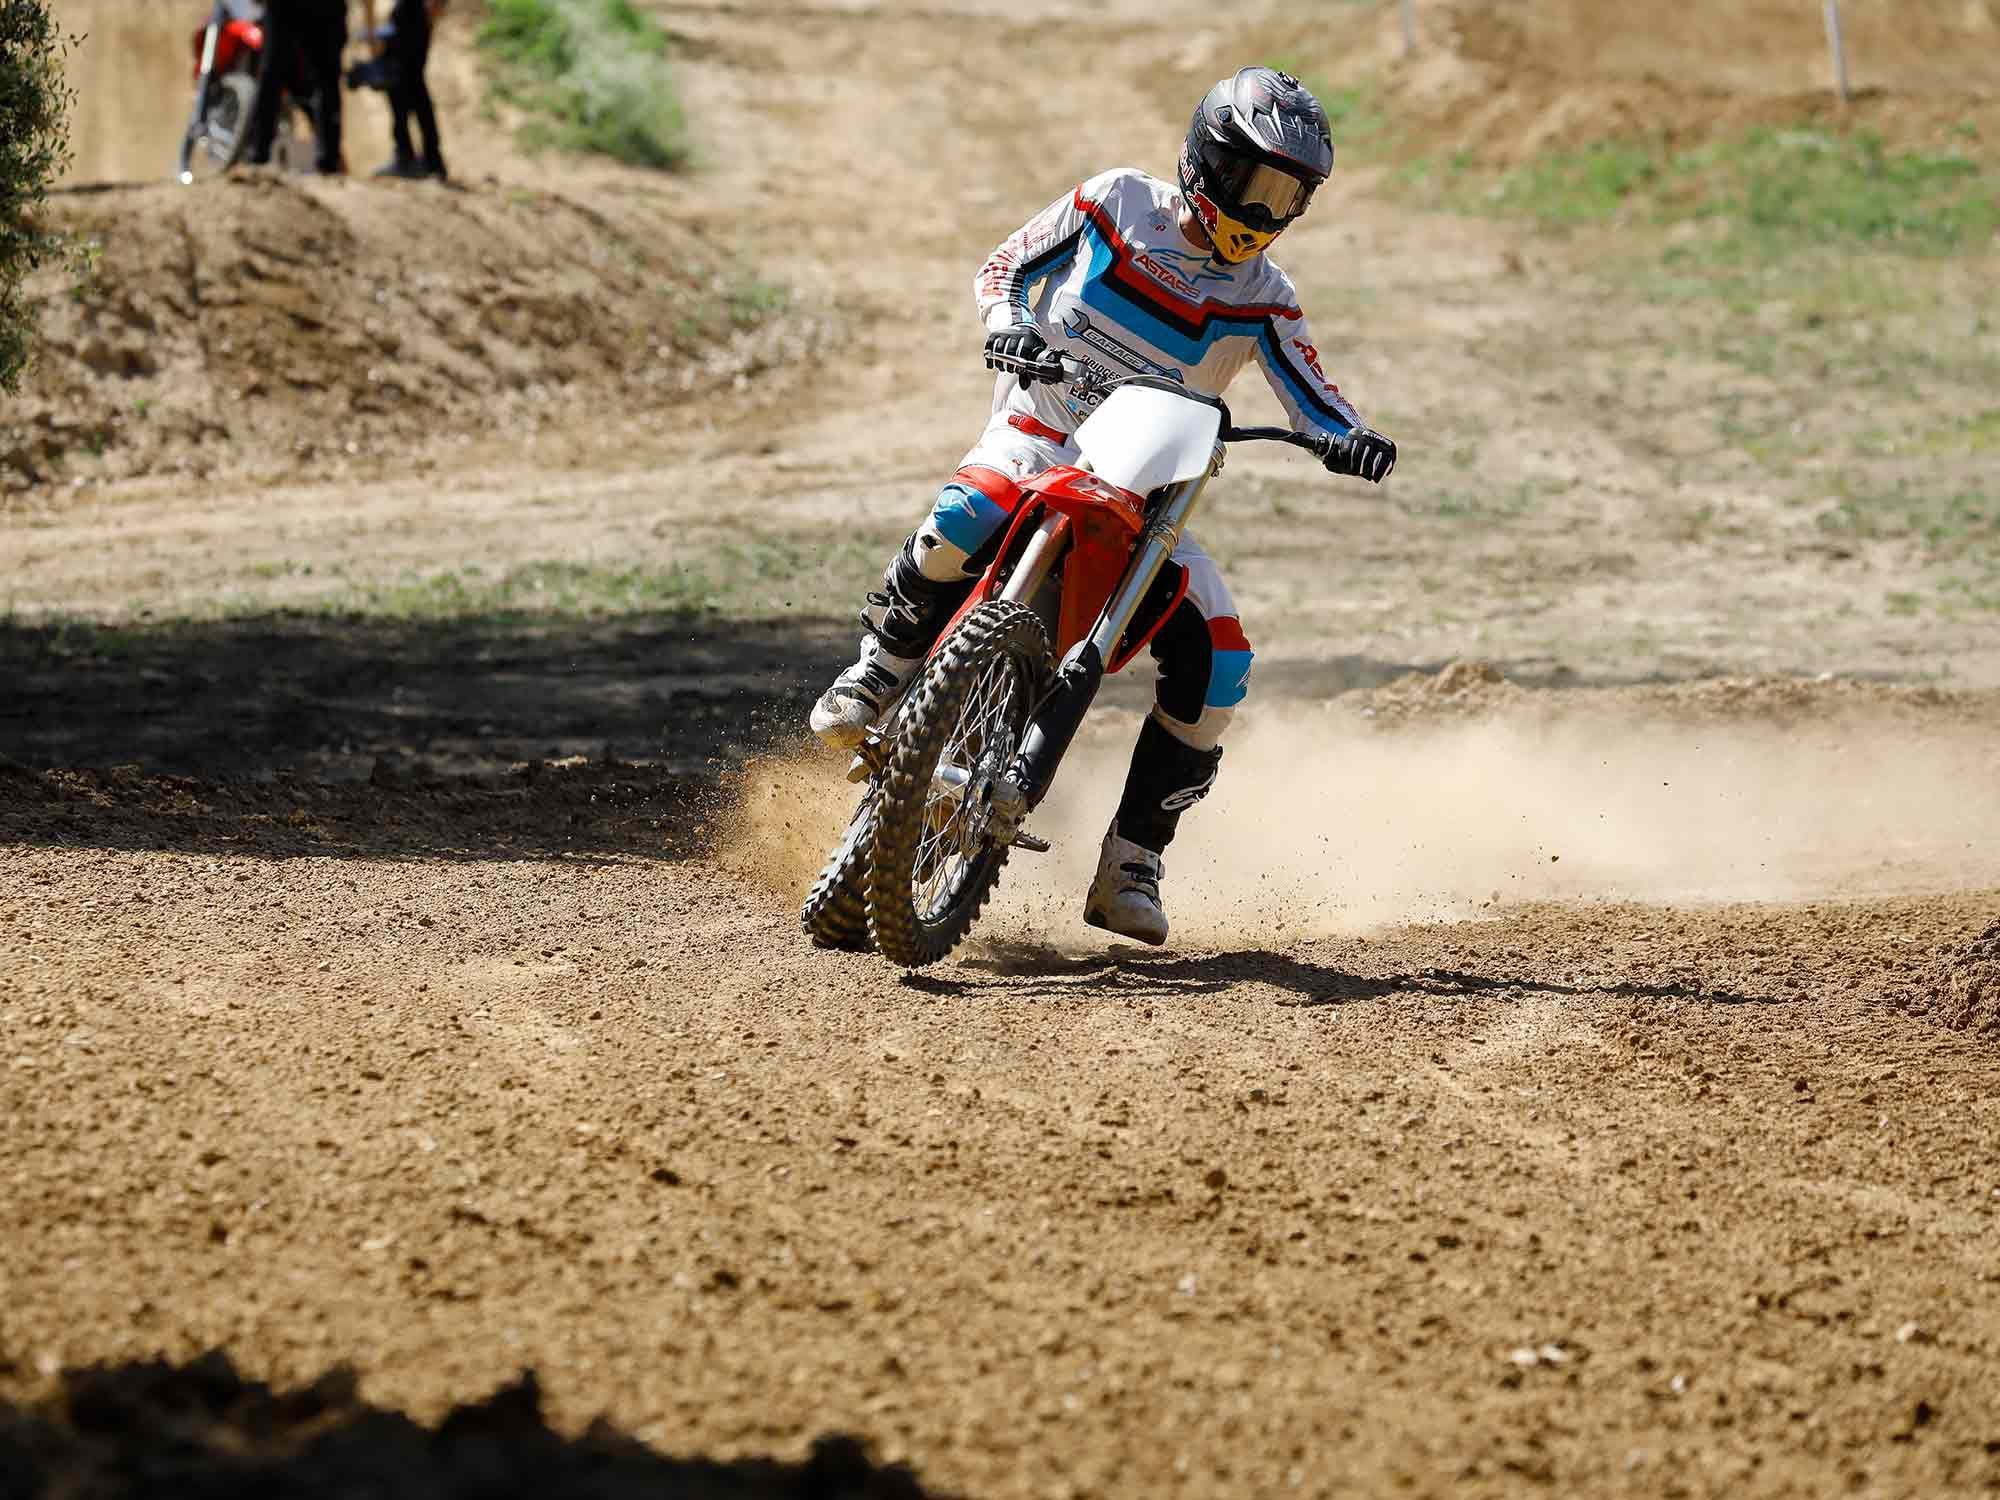 MX Golf left-handers are reminded of what the 19's Varg looks like as a DTX-style flat track bike.